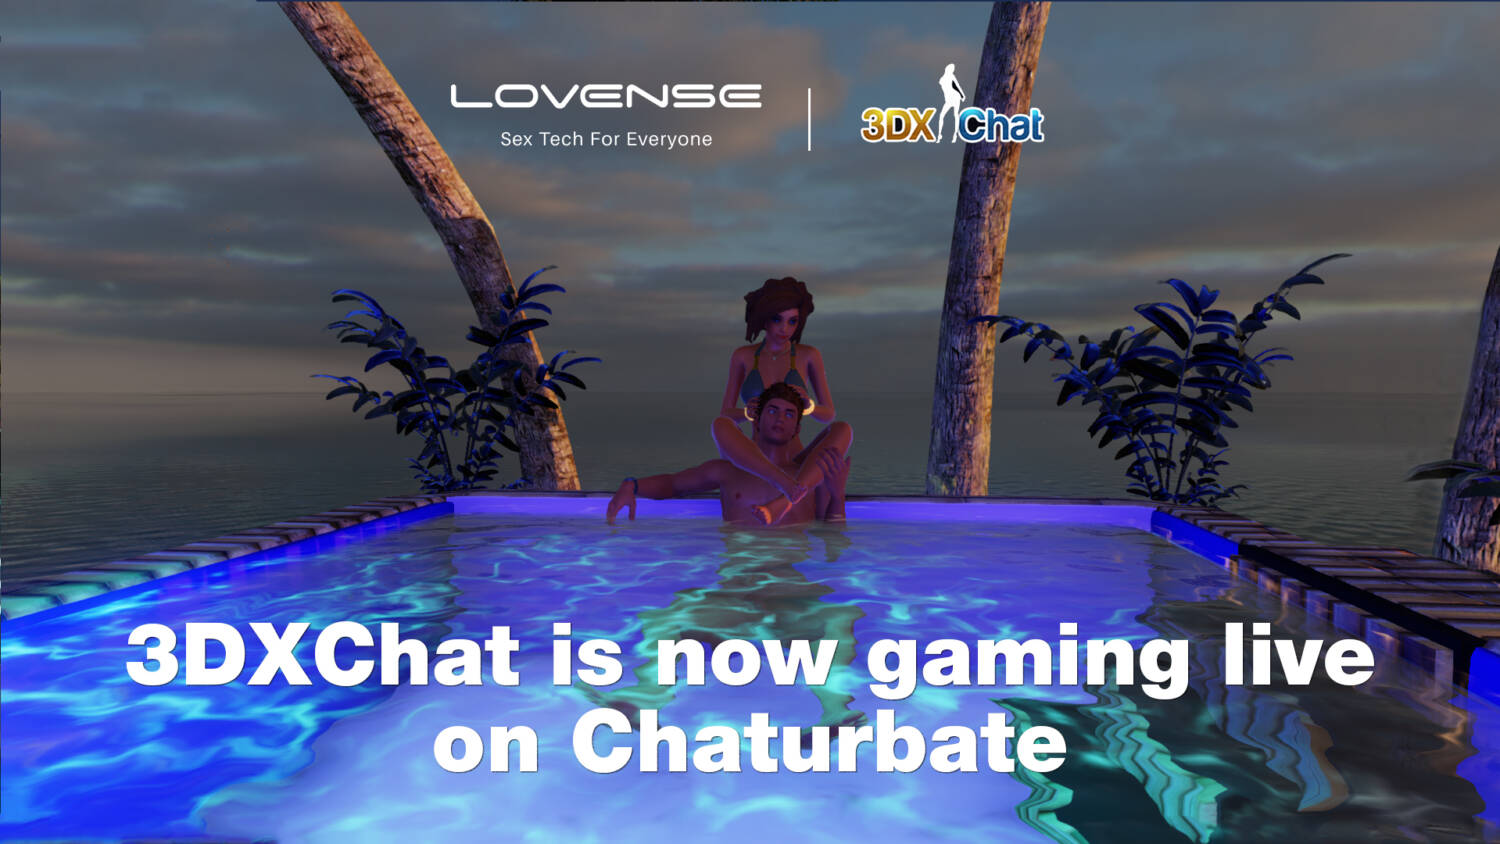 3d Vr Porn 3dxchat - Chaturbate Approves 3DXChat Adult Game in Model Streams - Future of Sex